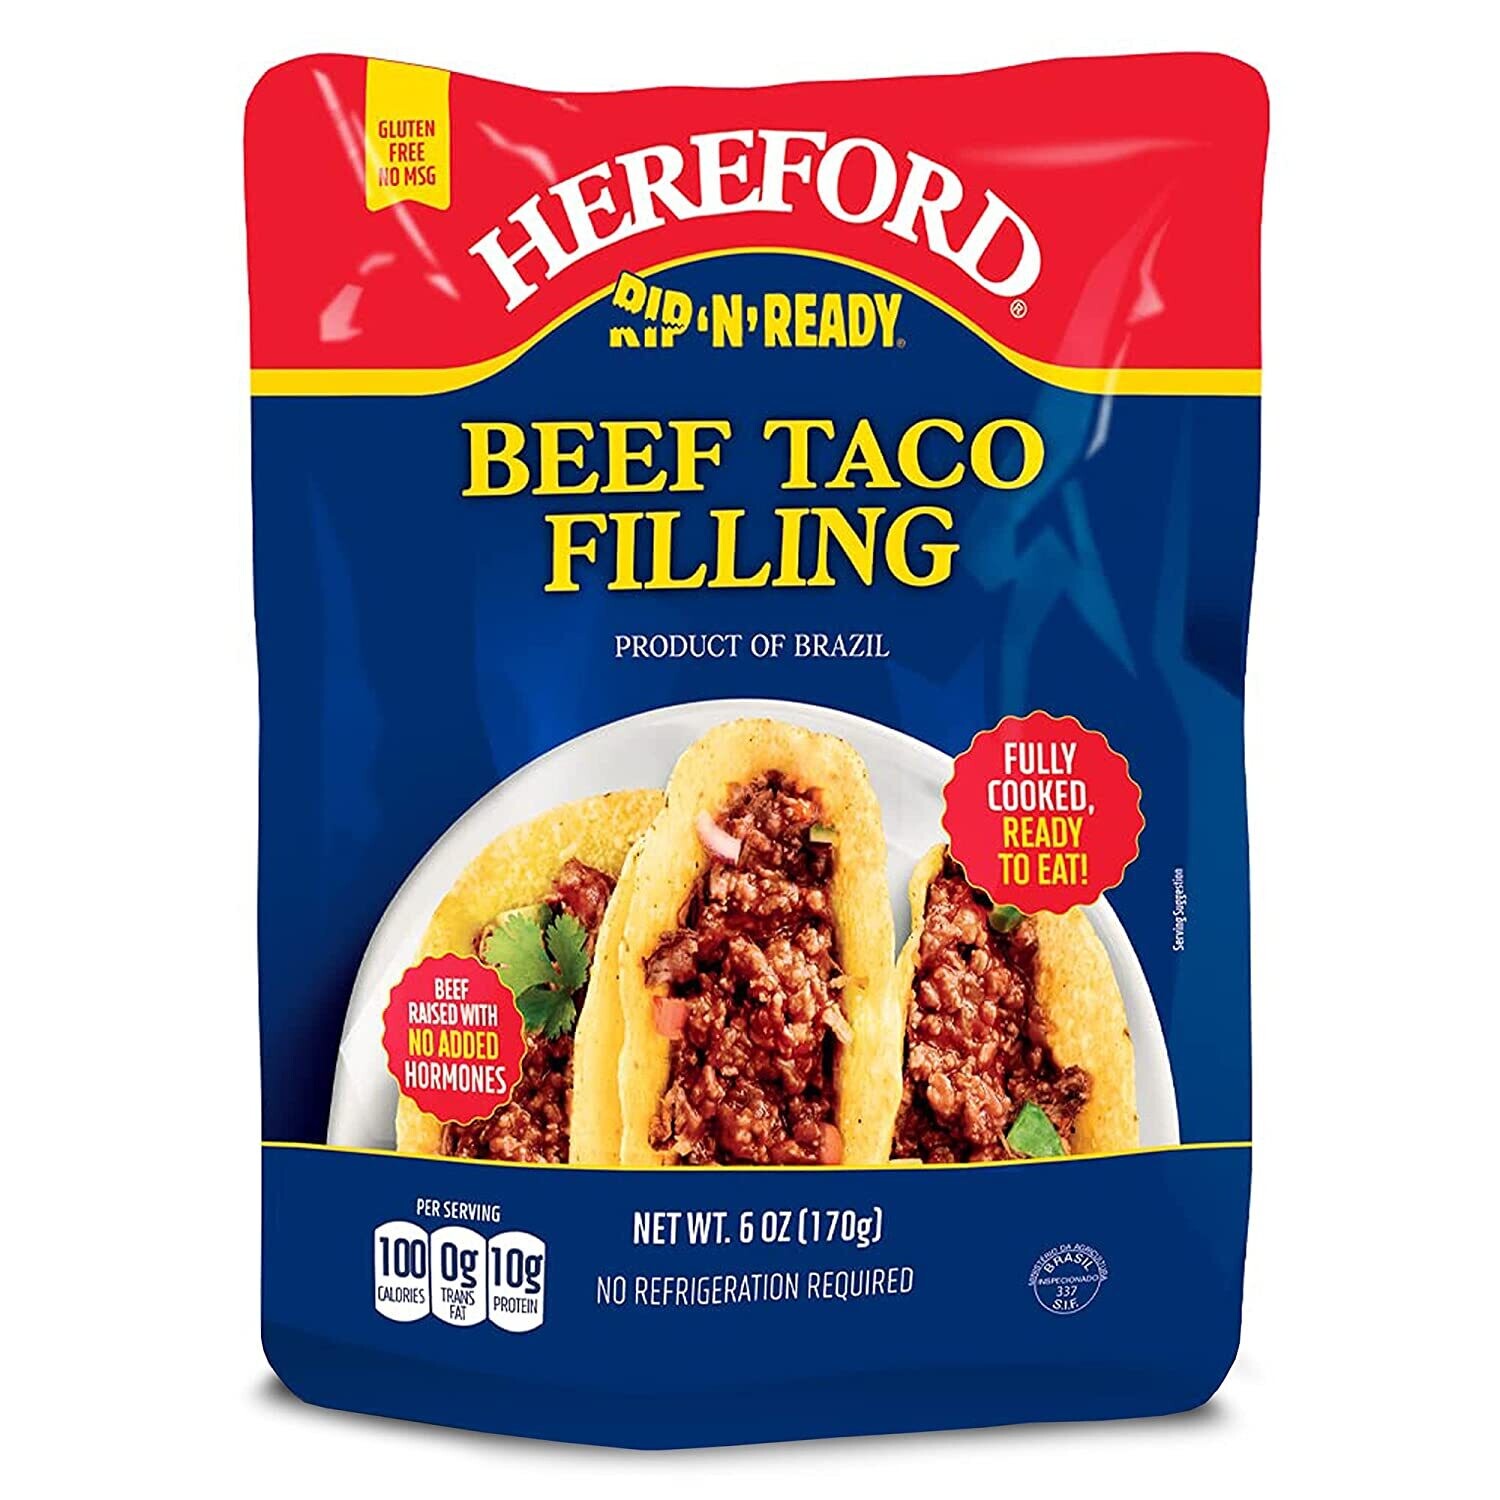 Hereford Rip-n-Ready Beef Taco Filling